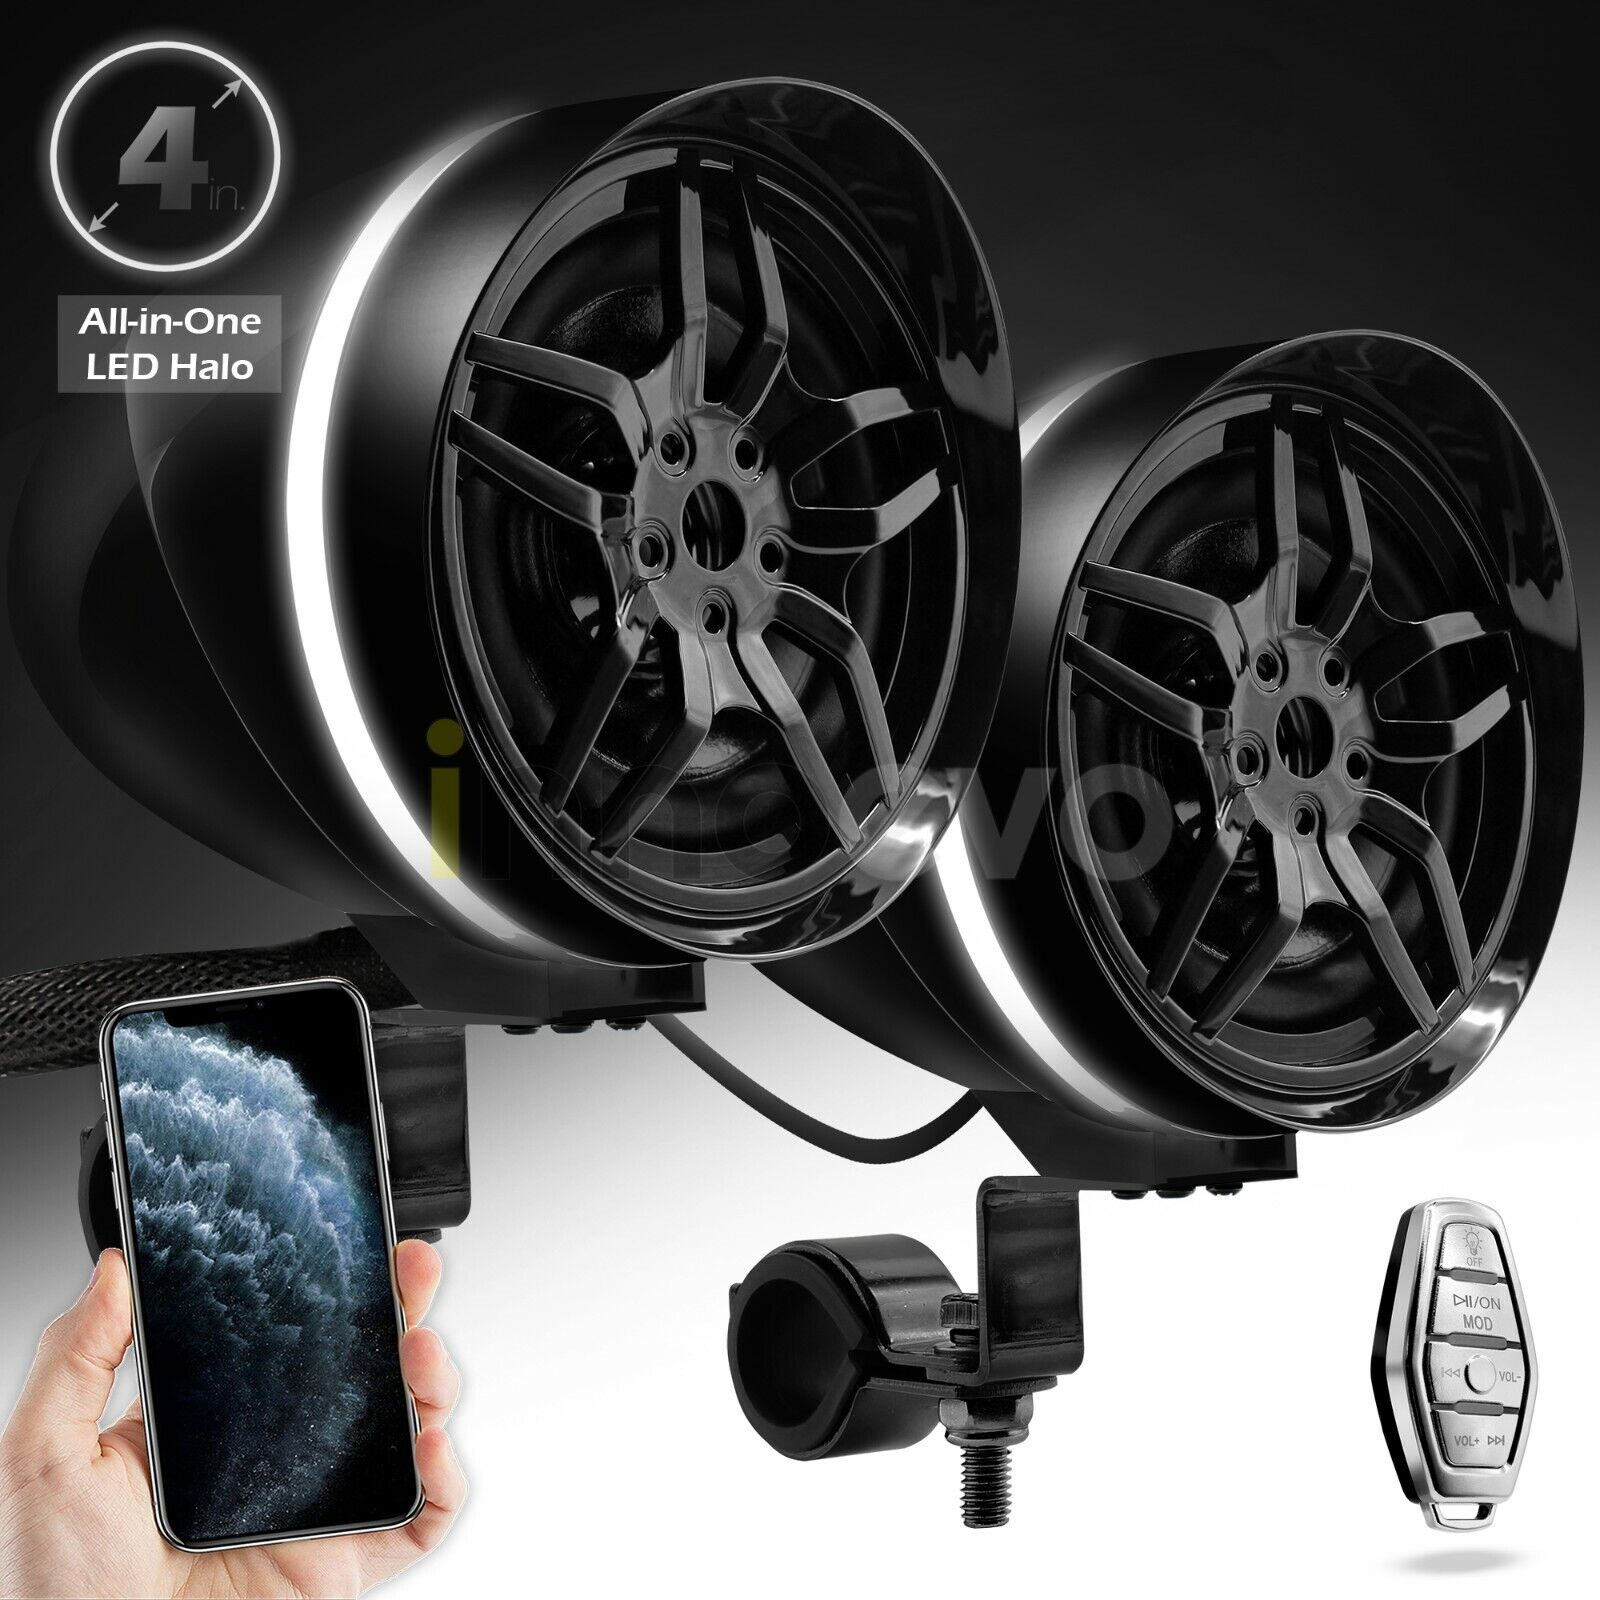 Waterproof Bluetooth ATV RZR Stereo LED Halo Speakers MP3 Audio System USB AUX